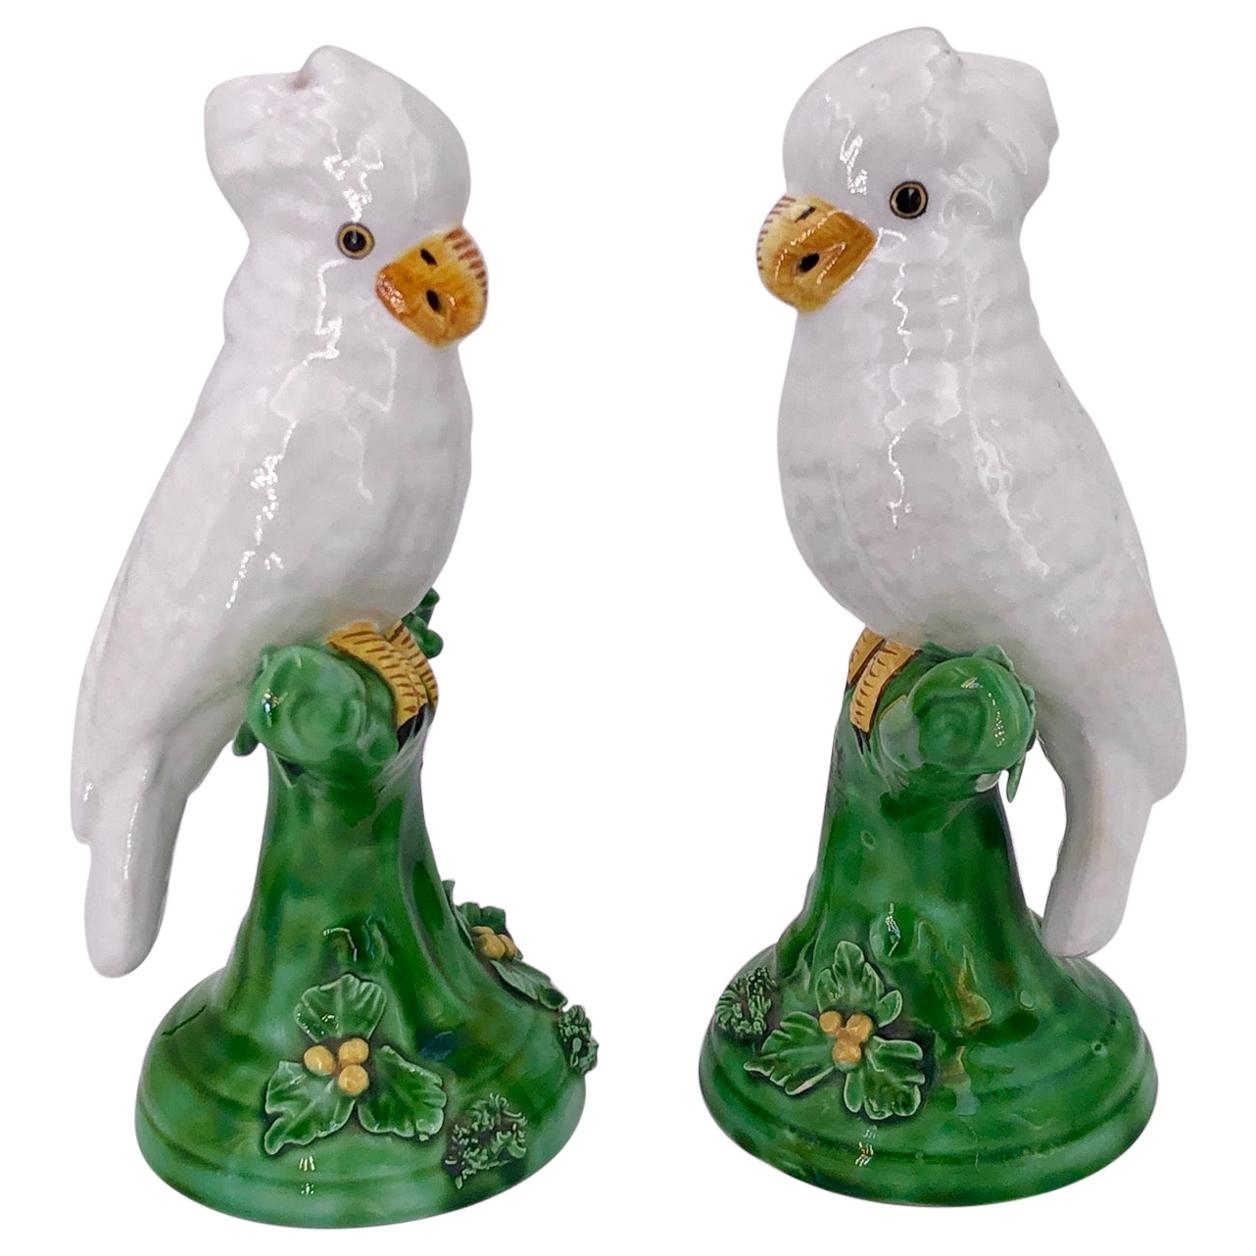 Beautiful Pair of Ceramic Decorative Parrots by Meiselman Made in Italy For Sale